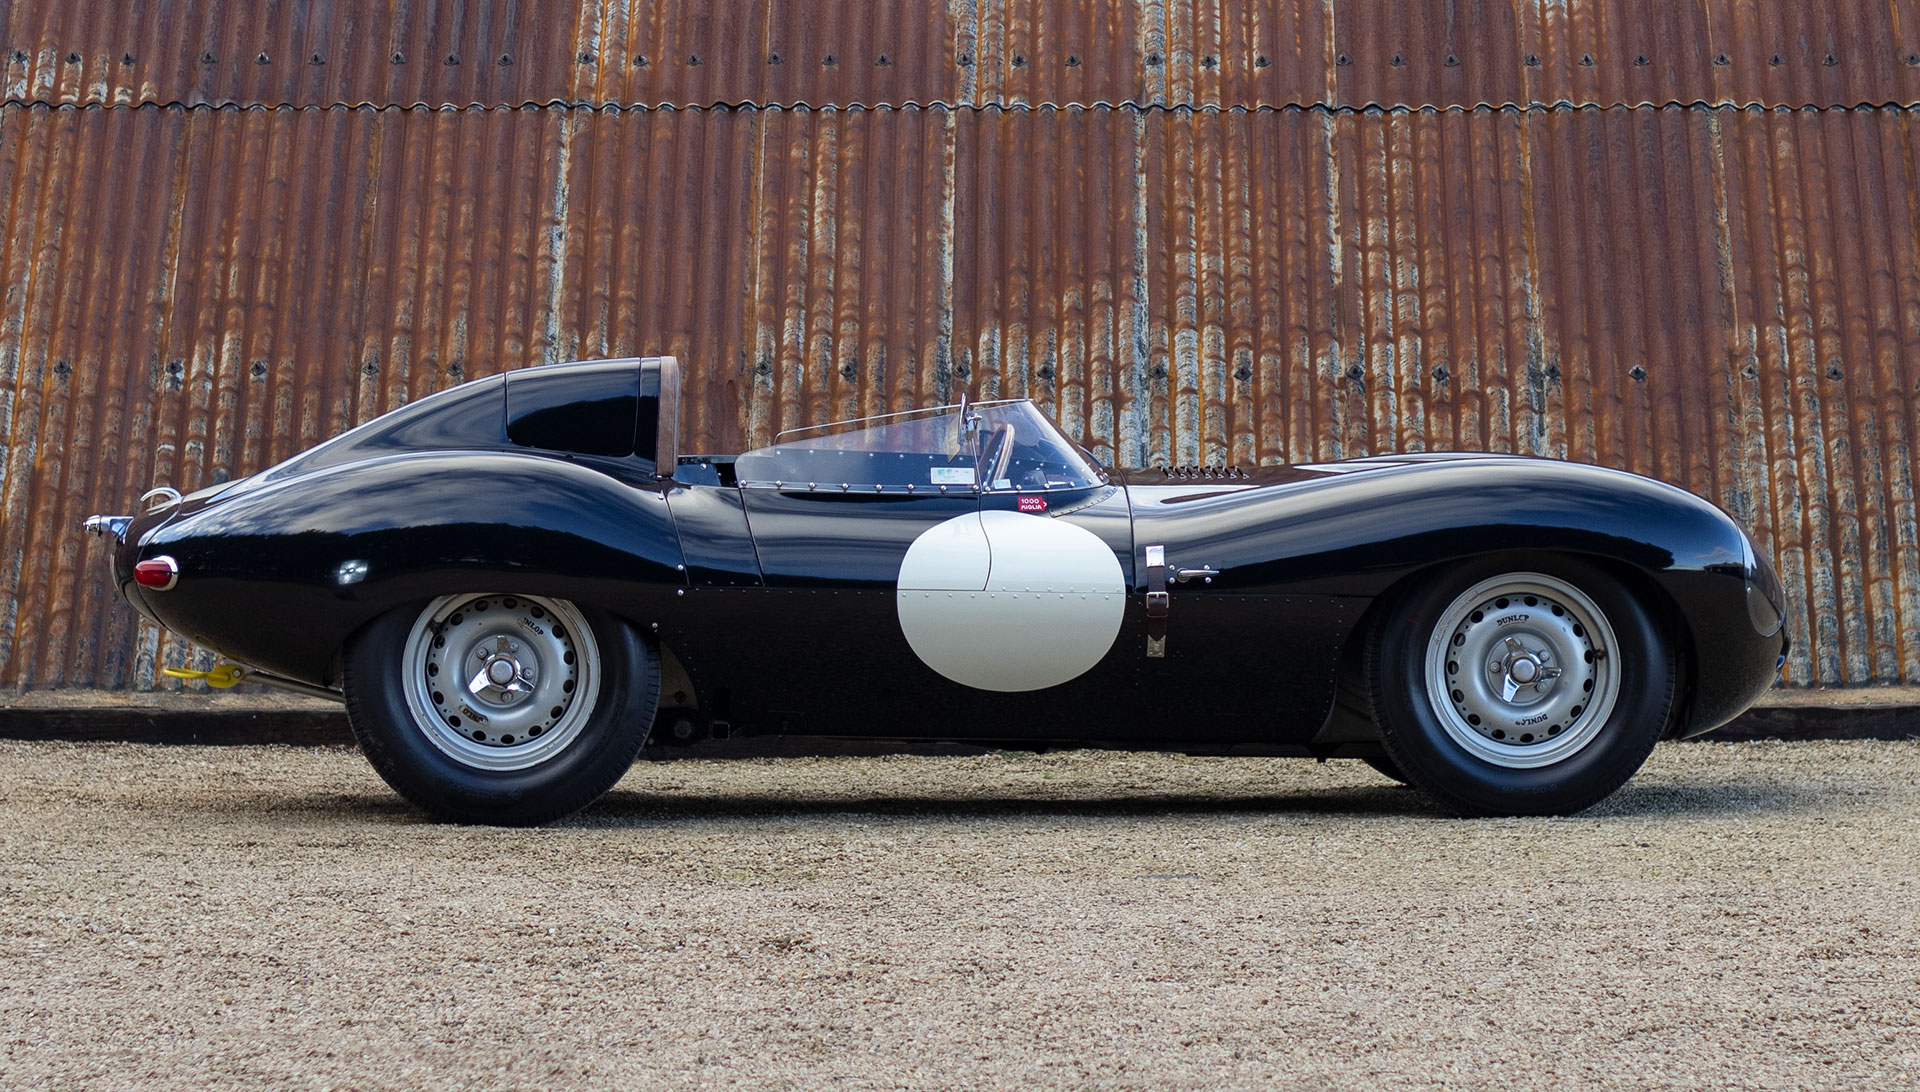 Going fast? 5 classic racing cars worth watching at auction this month